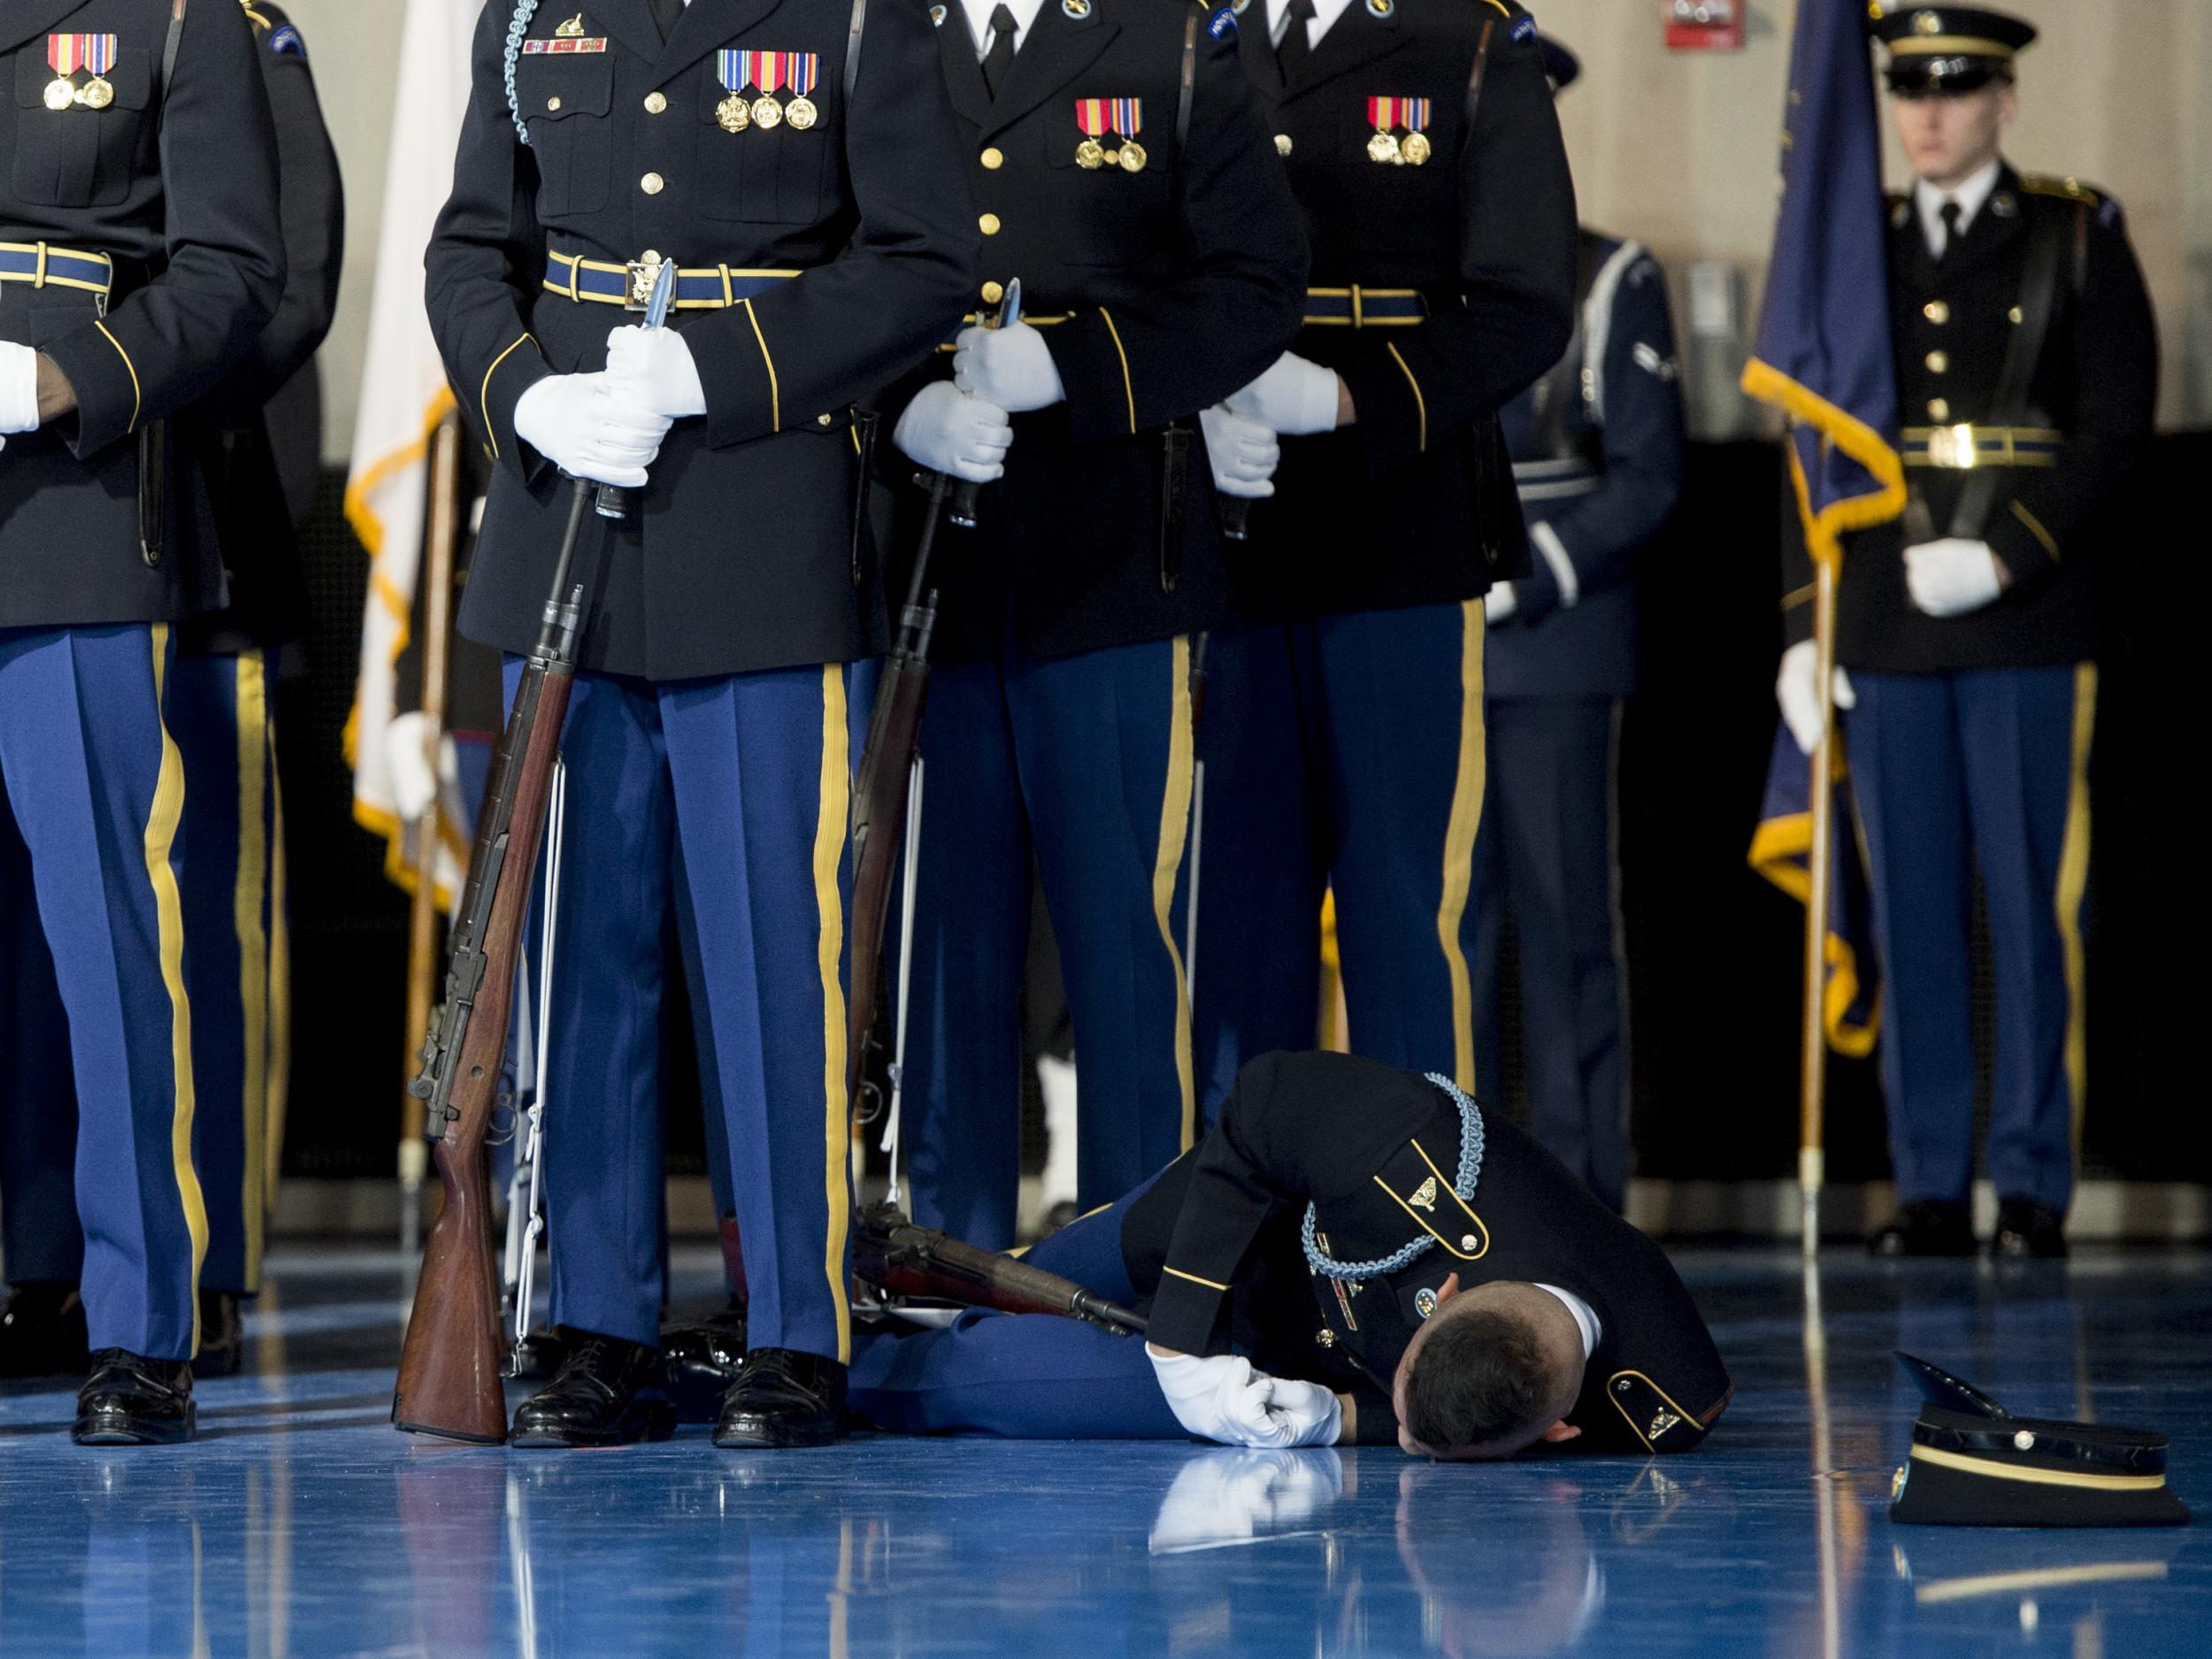 Fainting is not uncommon for Honour Guards, who have to stand for hours at a time